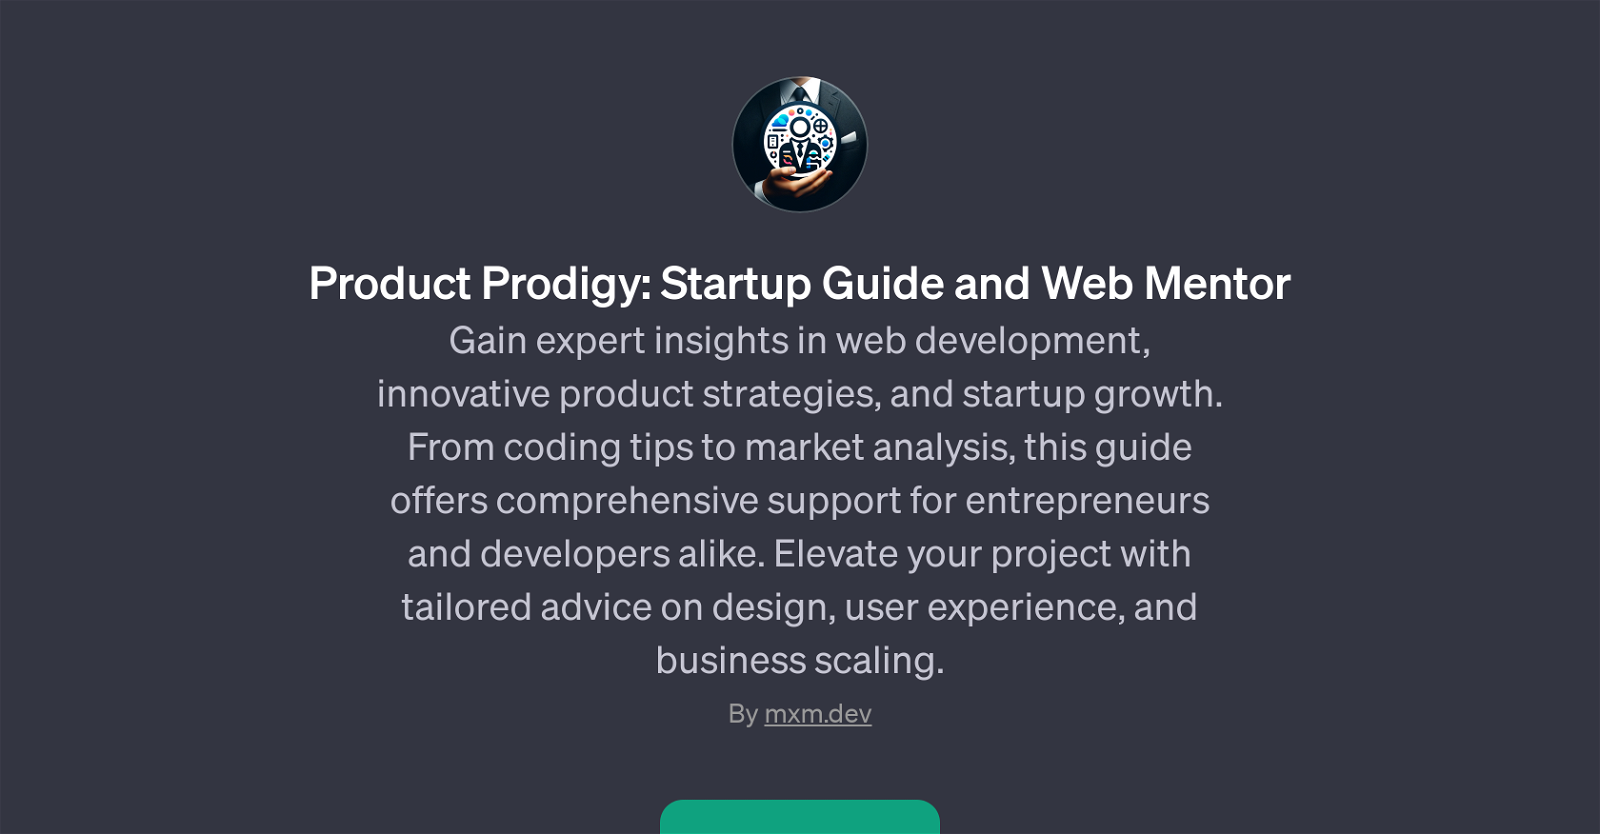 Product Prodigy: Startup Guide and Web Mentor website